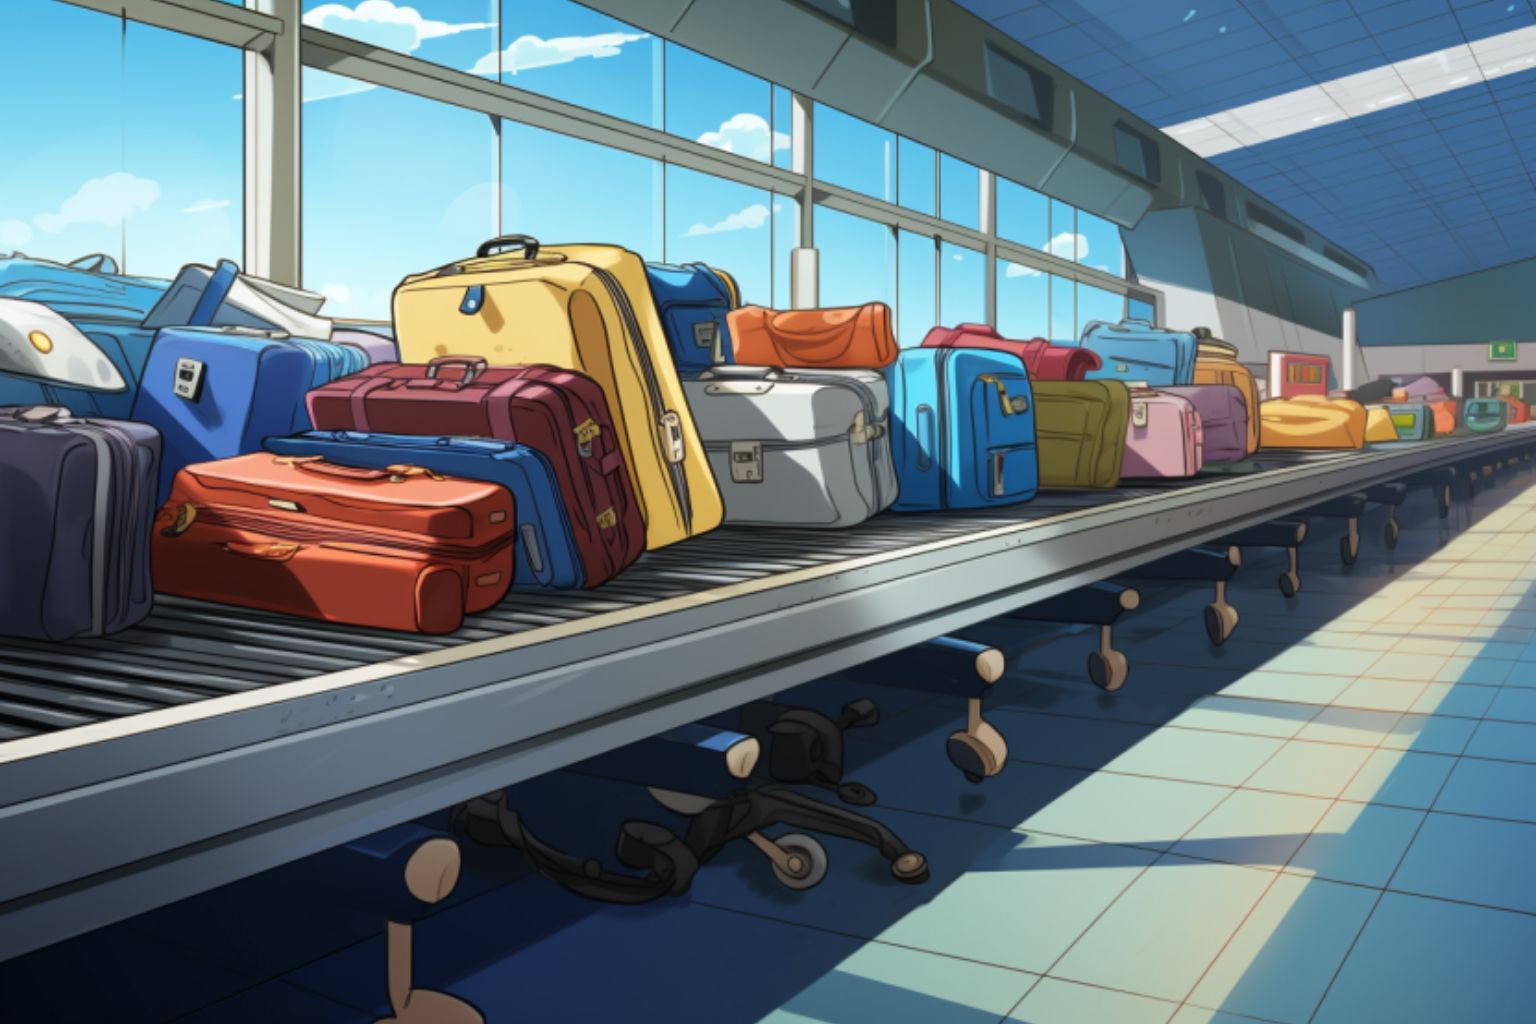 If you miss a flight connection but your luggage doesn’t, who’s liable when your bag goes missing? It’s an odd problem.